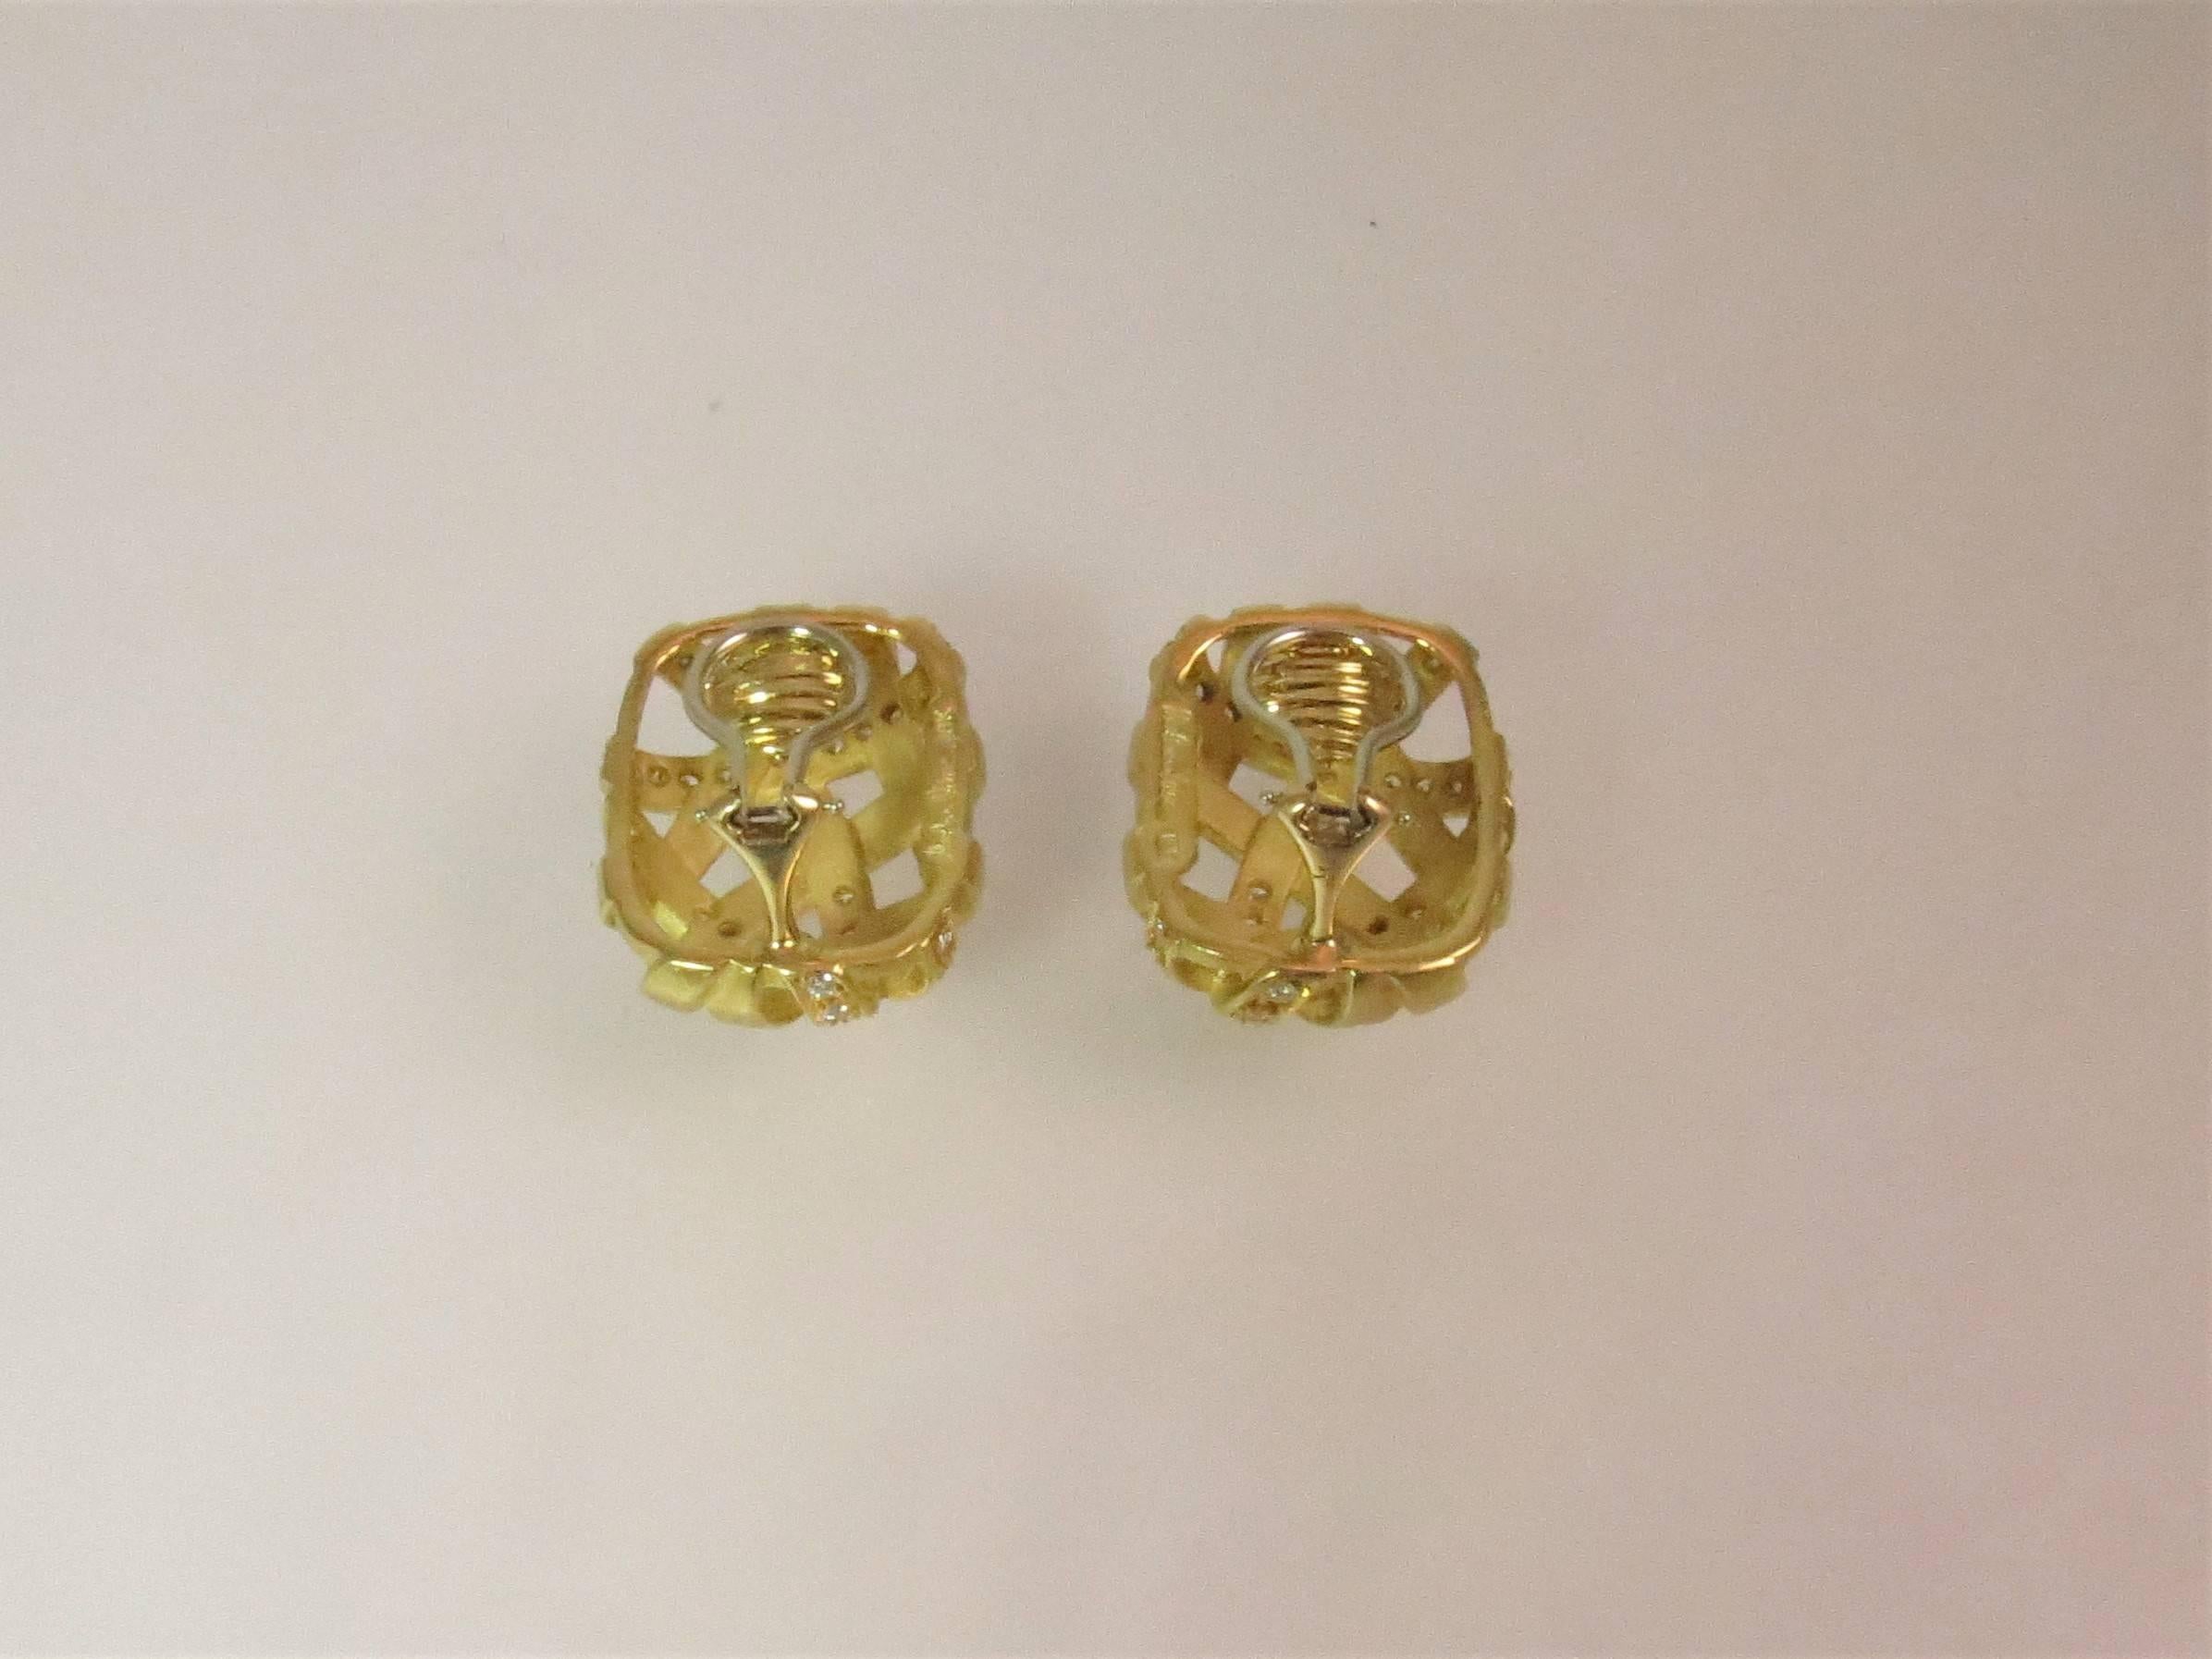 Marlene Stowe 18K yellow gold and diamond lattice design ear clips with 66 full cut round diamonds weighing 1.55cts, G-H color, VS clarity. 